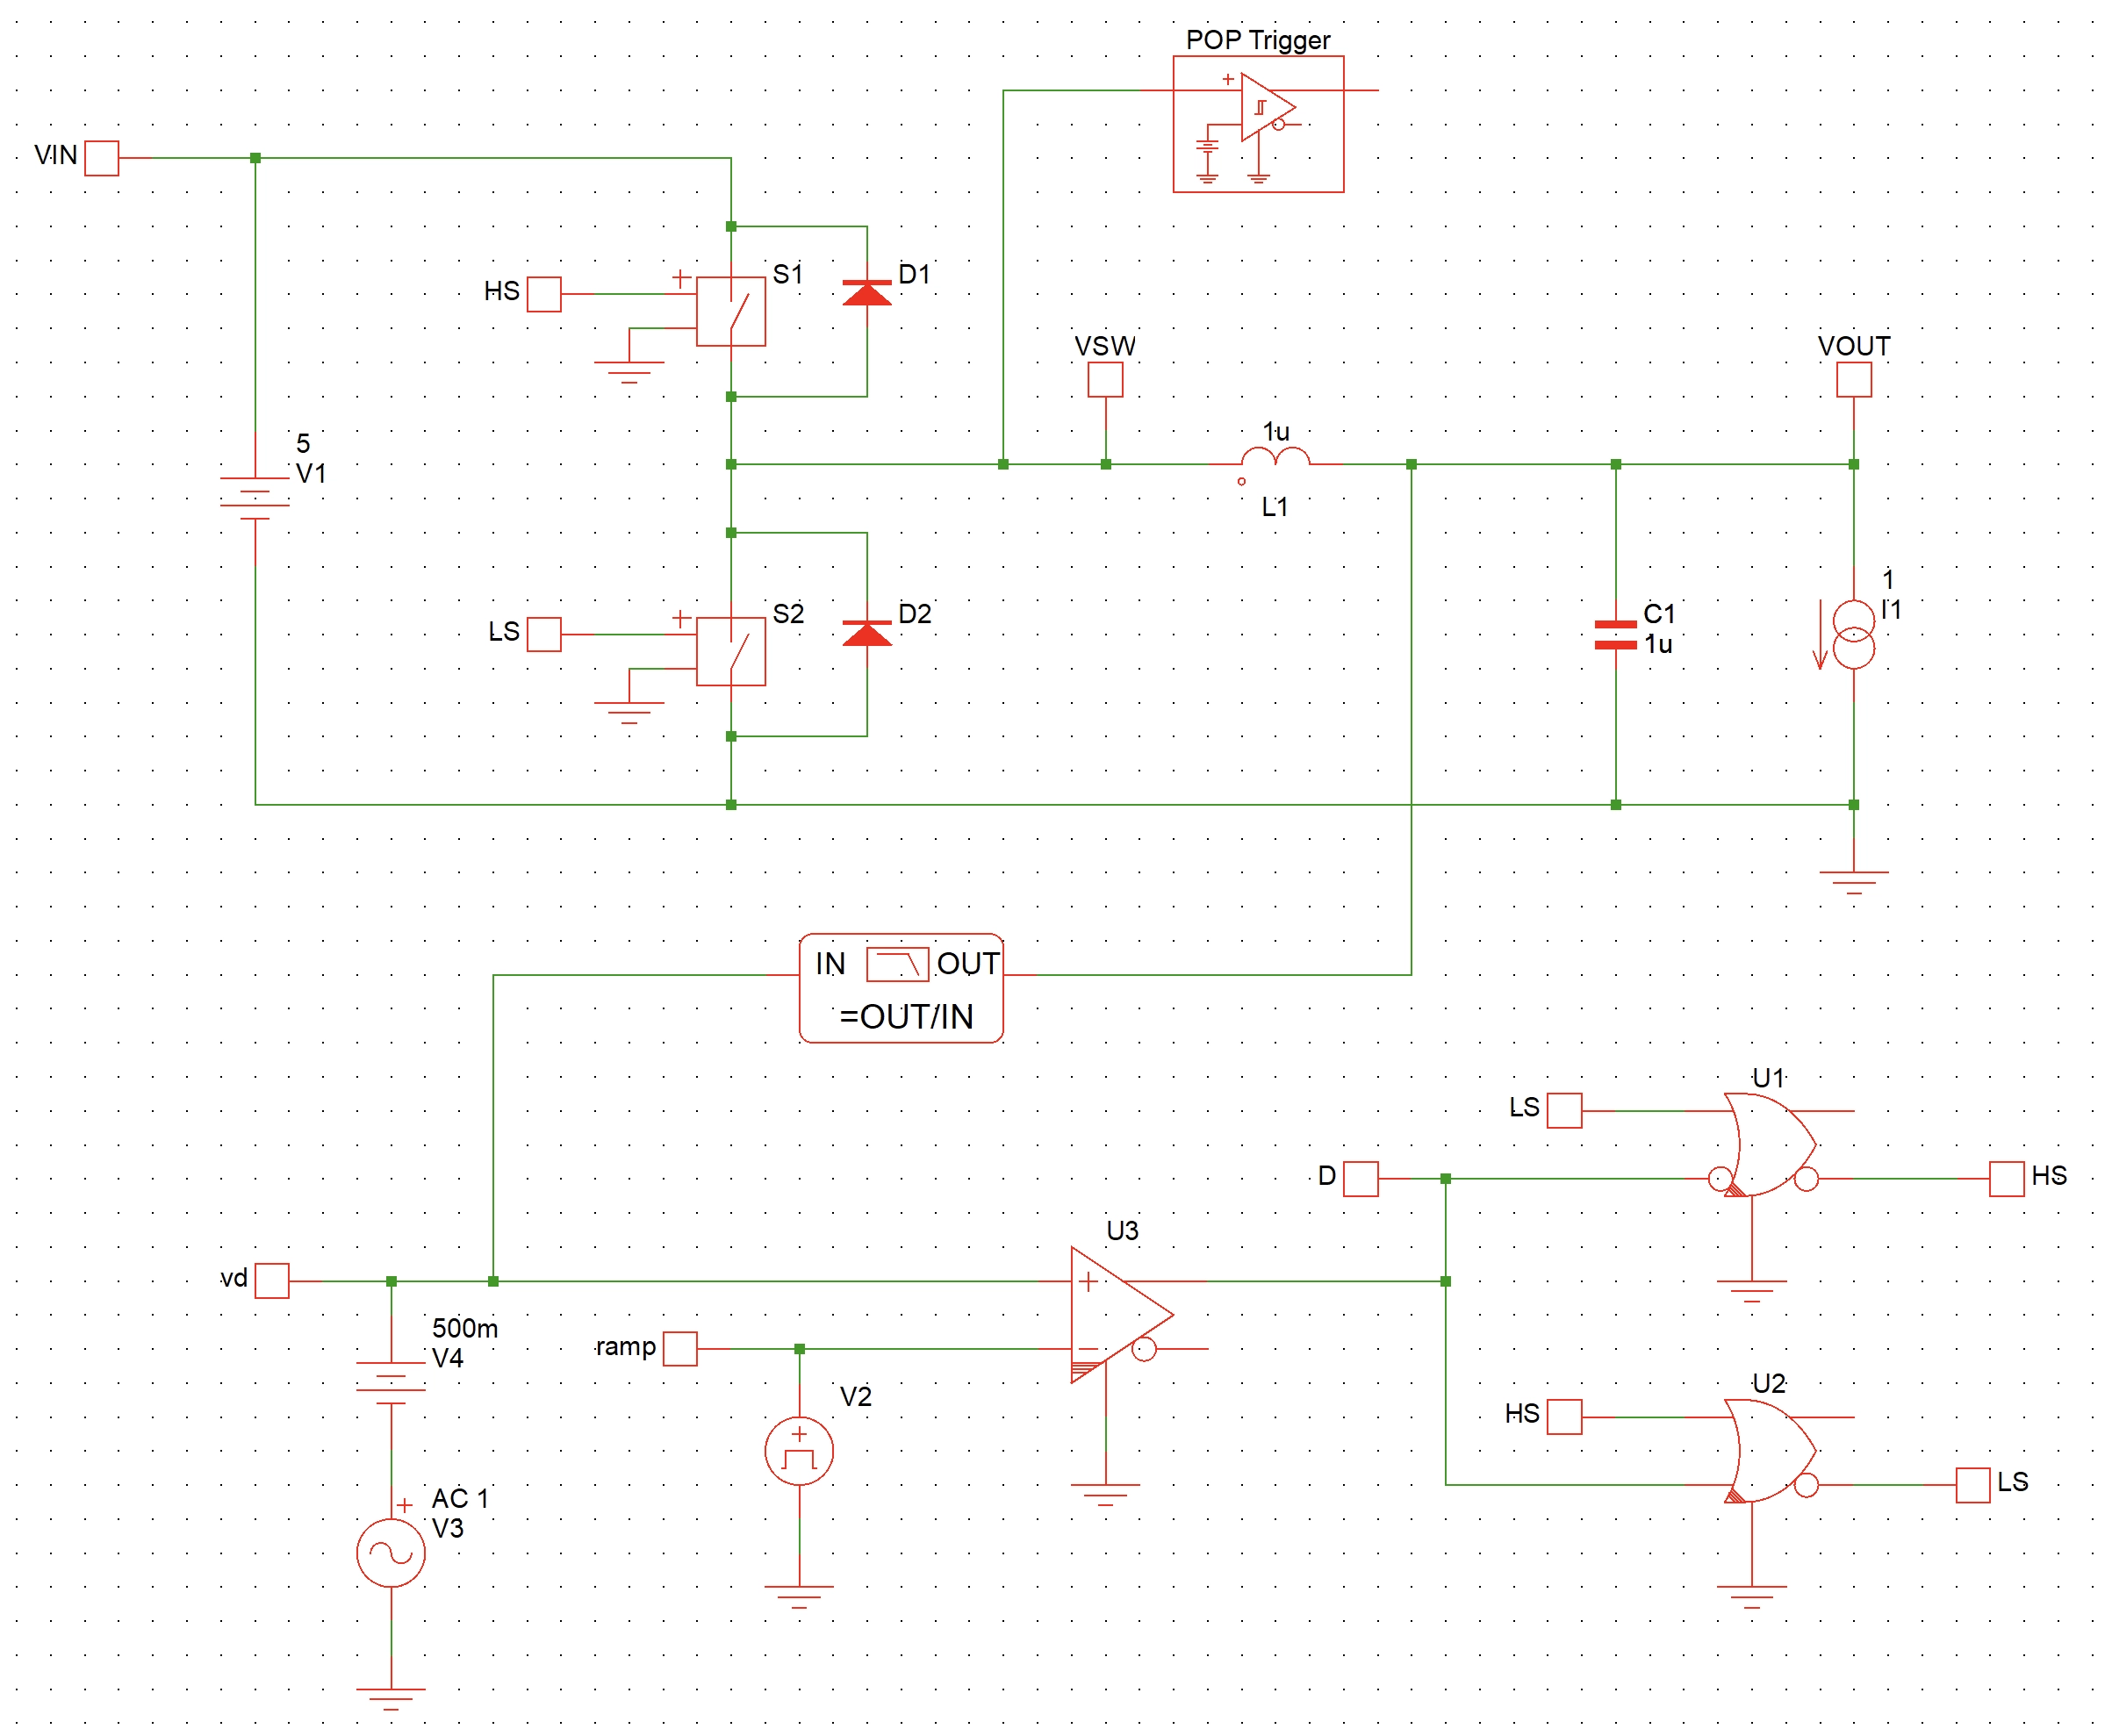 Buck converter model in Simplis with DC current source as the load